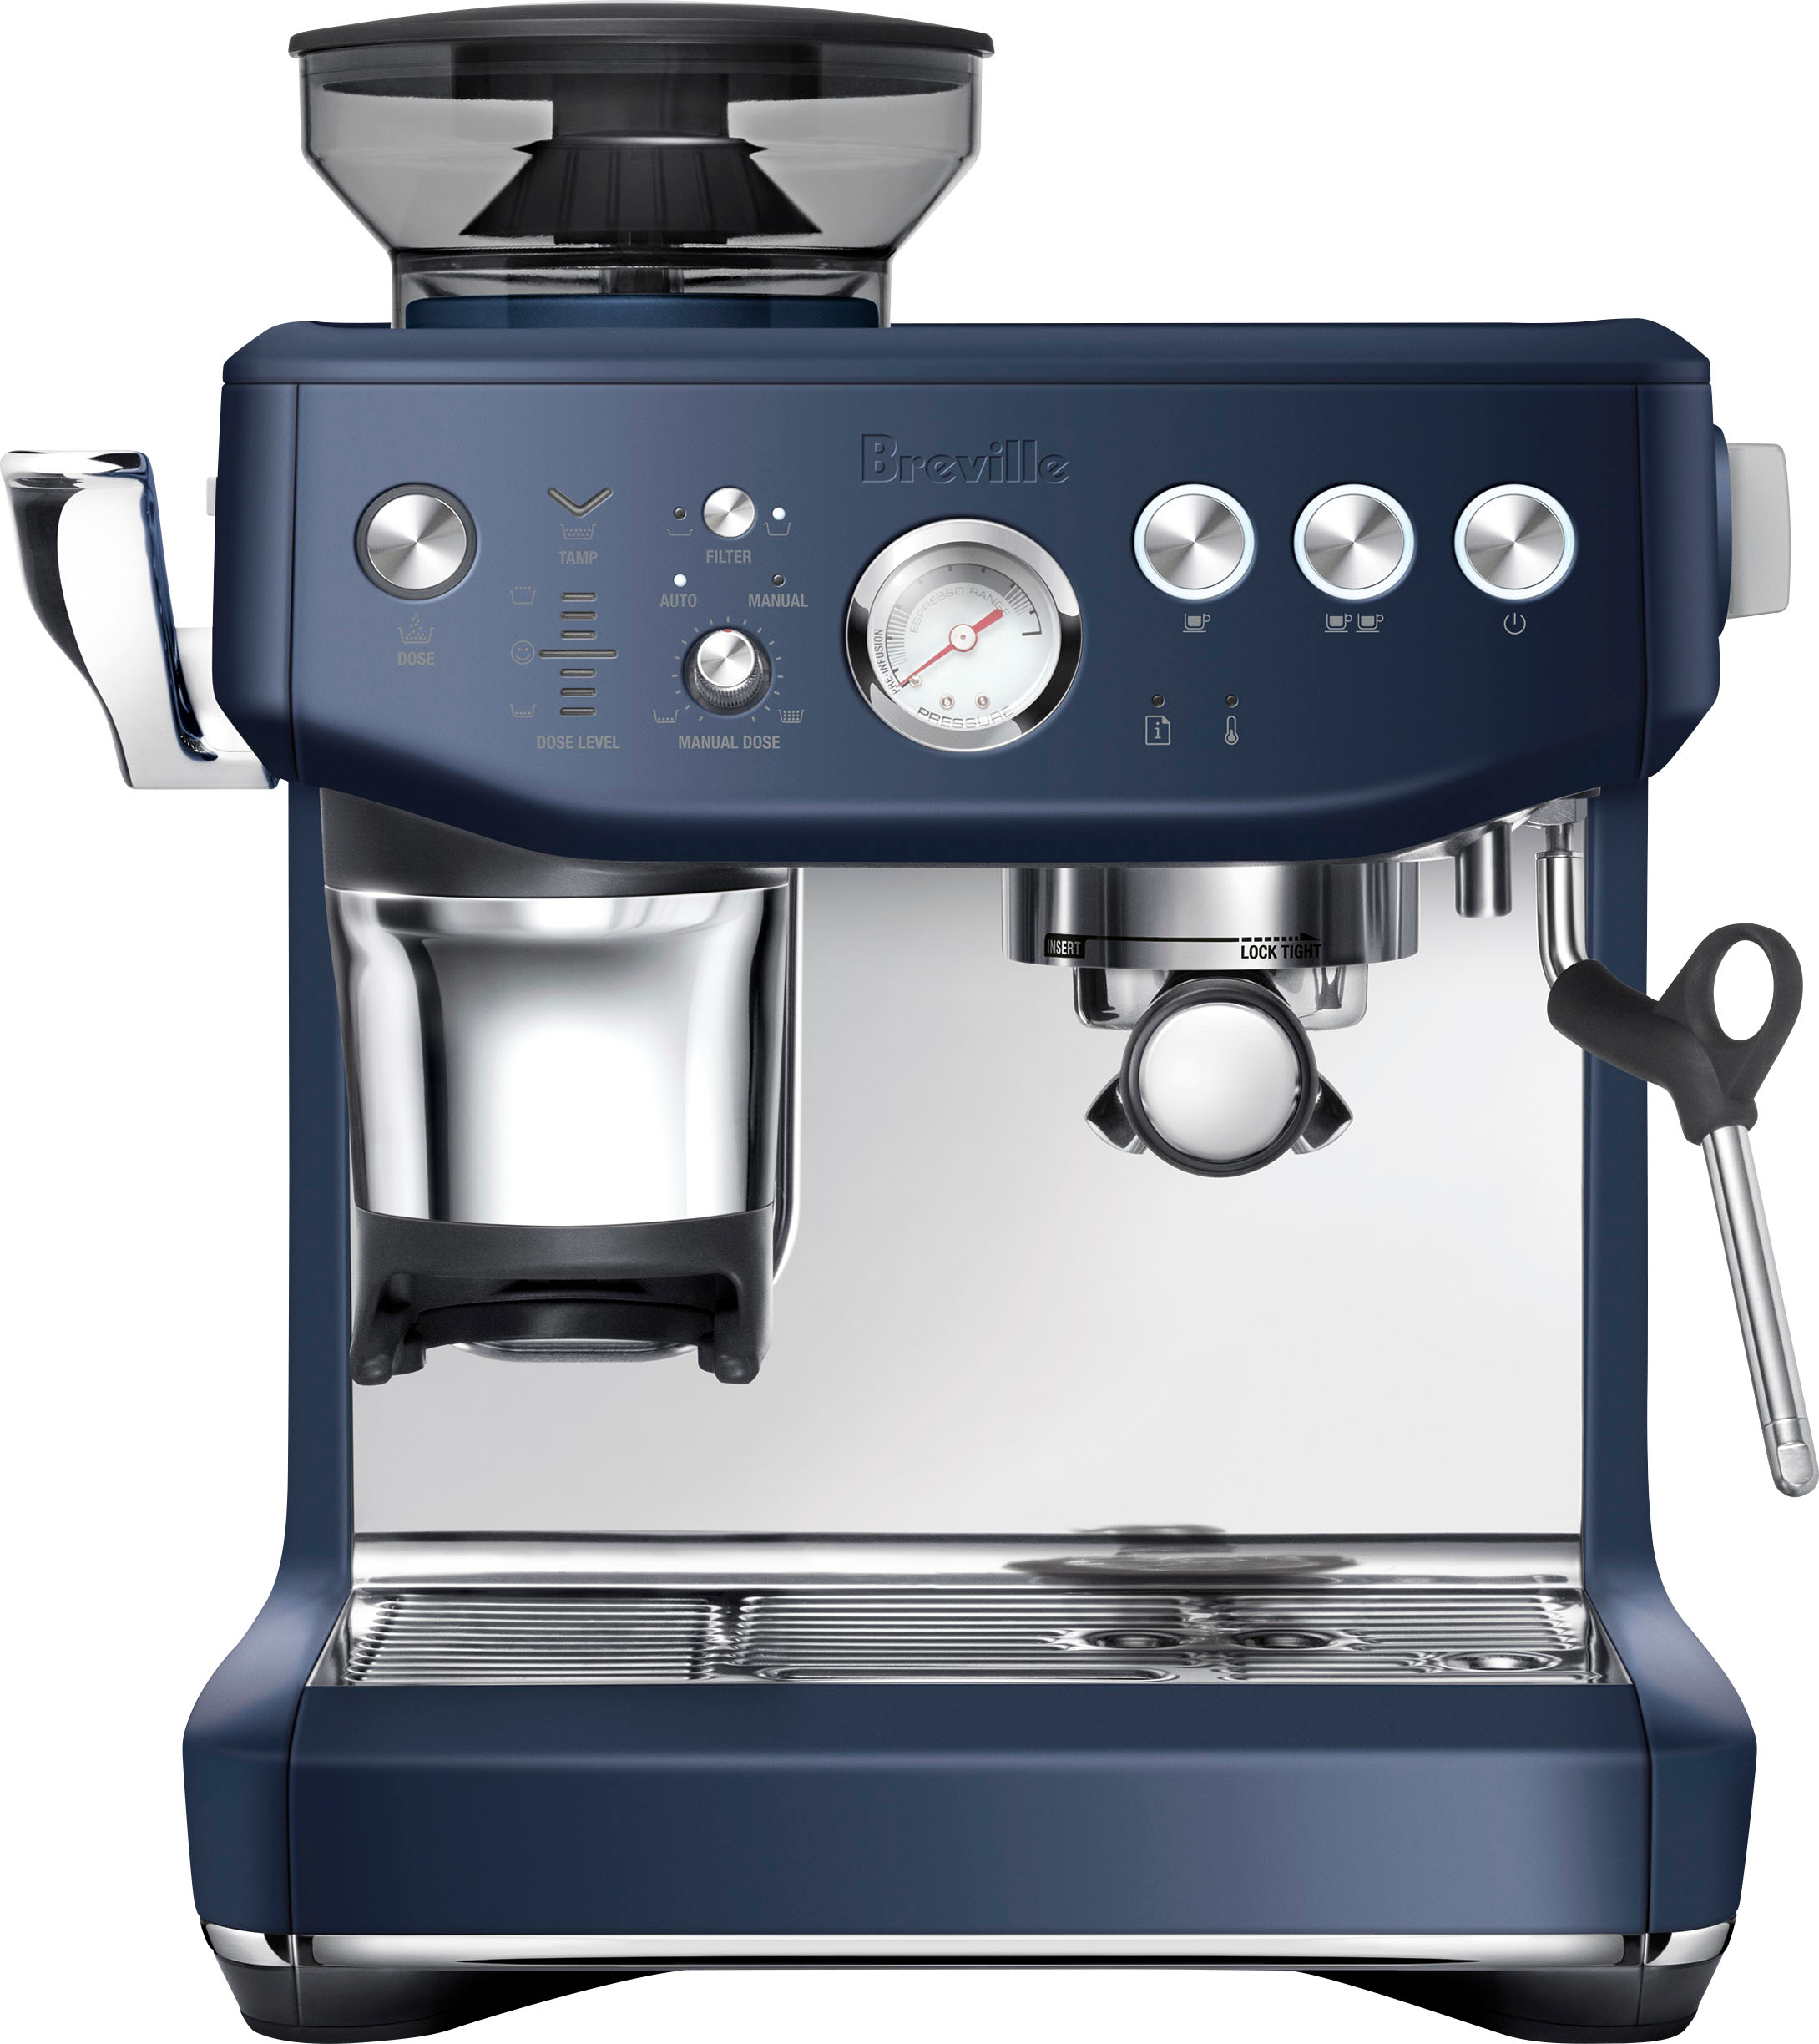 How To Use A Breville Coffee Machine